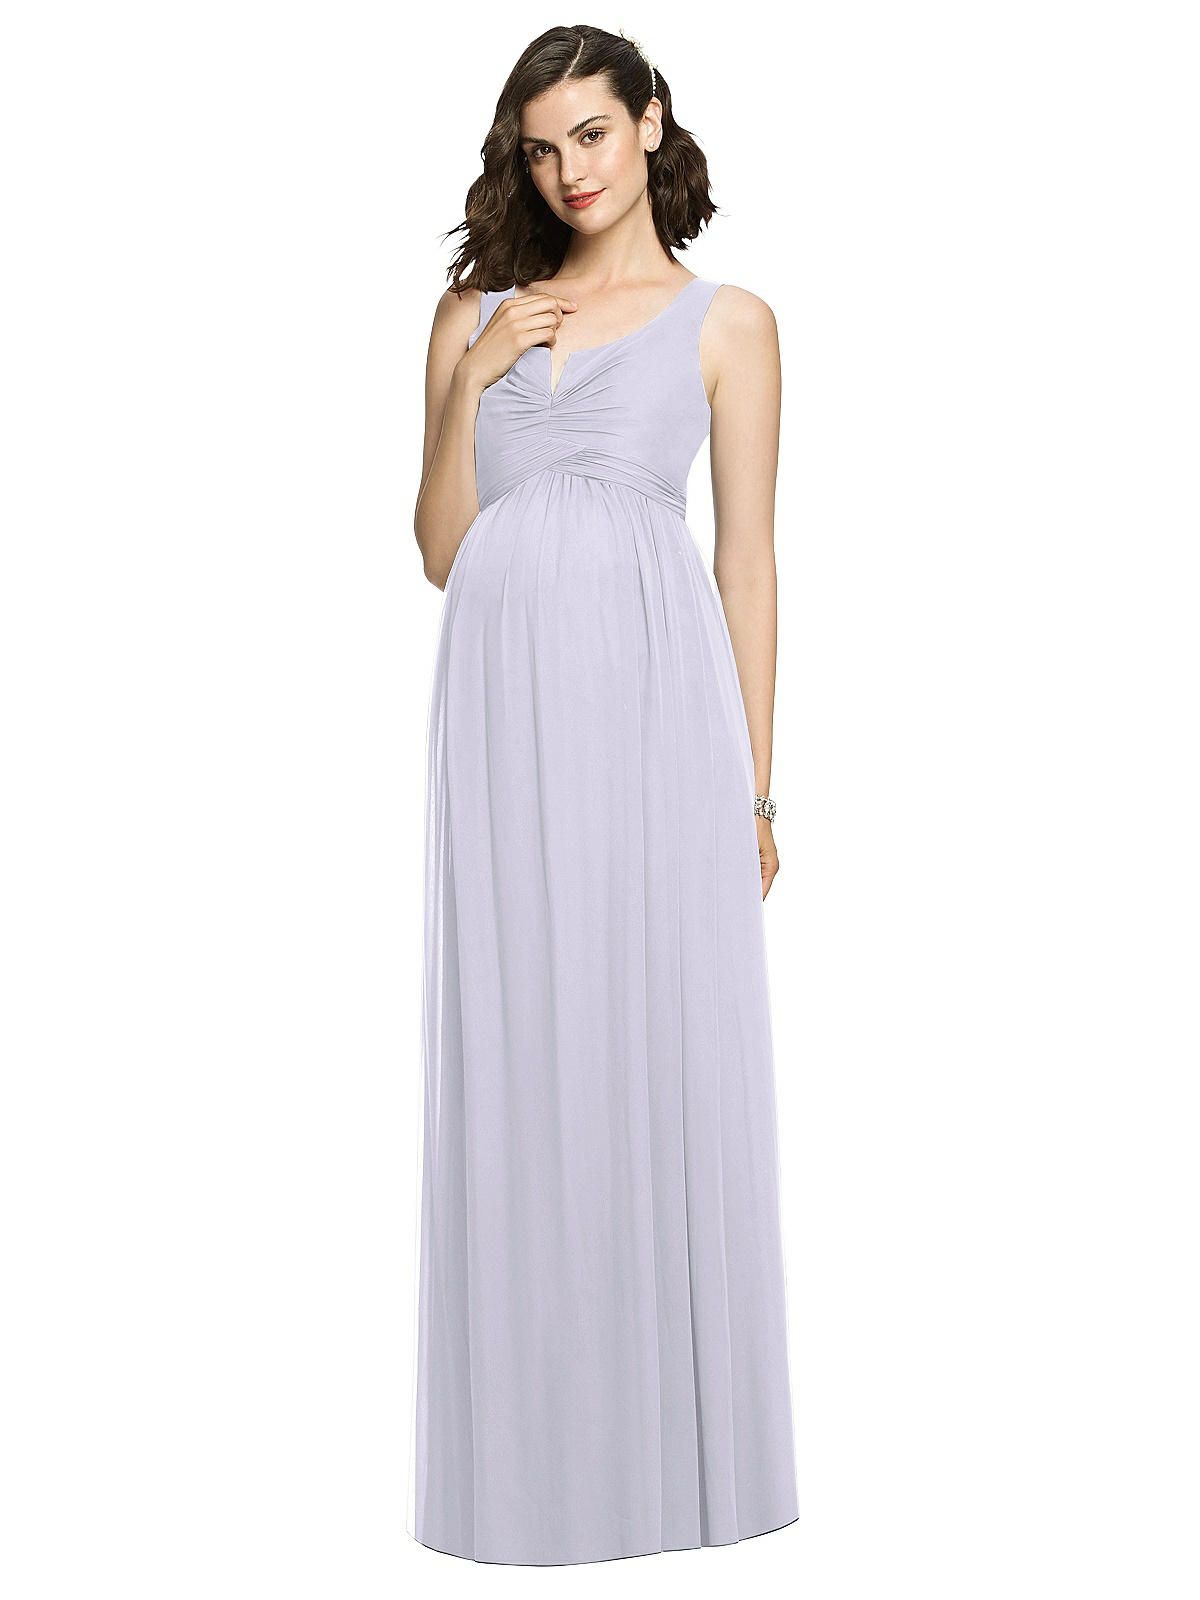 Sleeveless Notch Maternity Dress in Silver Dove | The Dessy Group